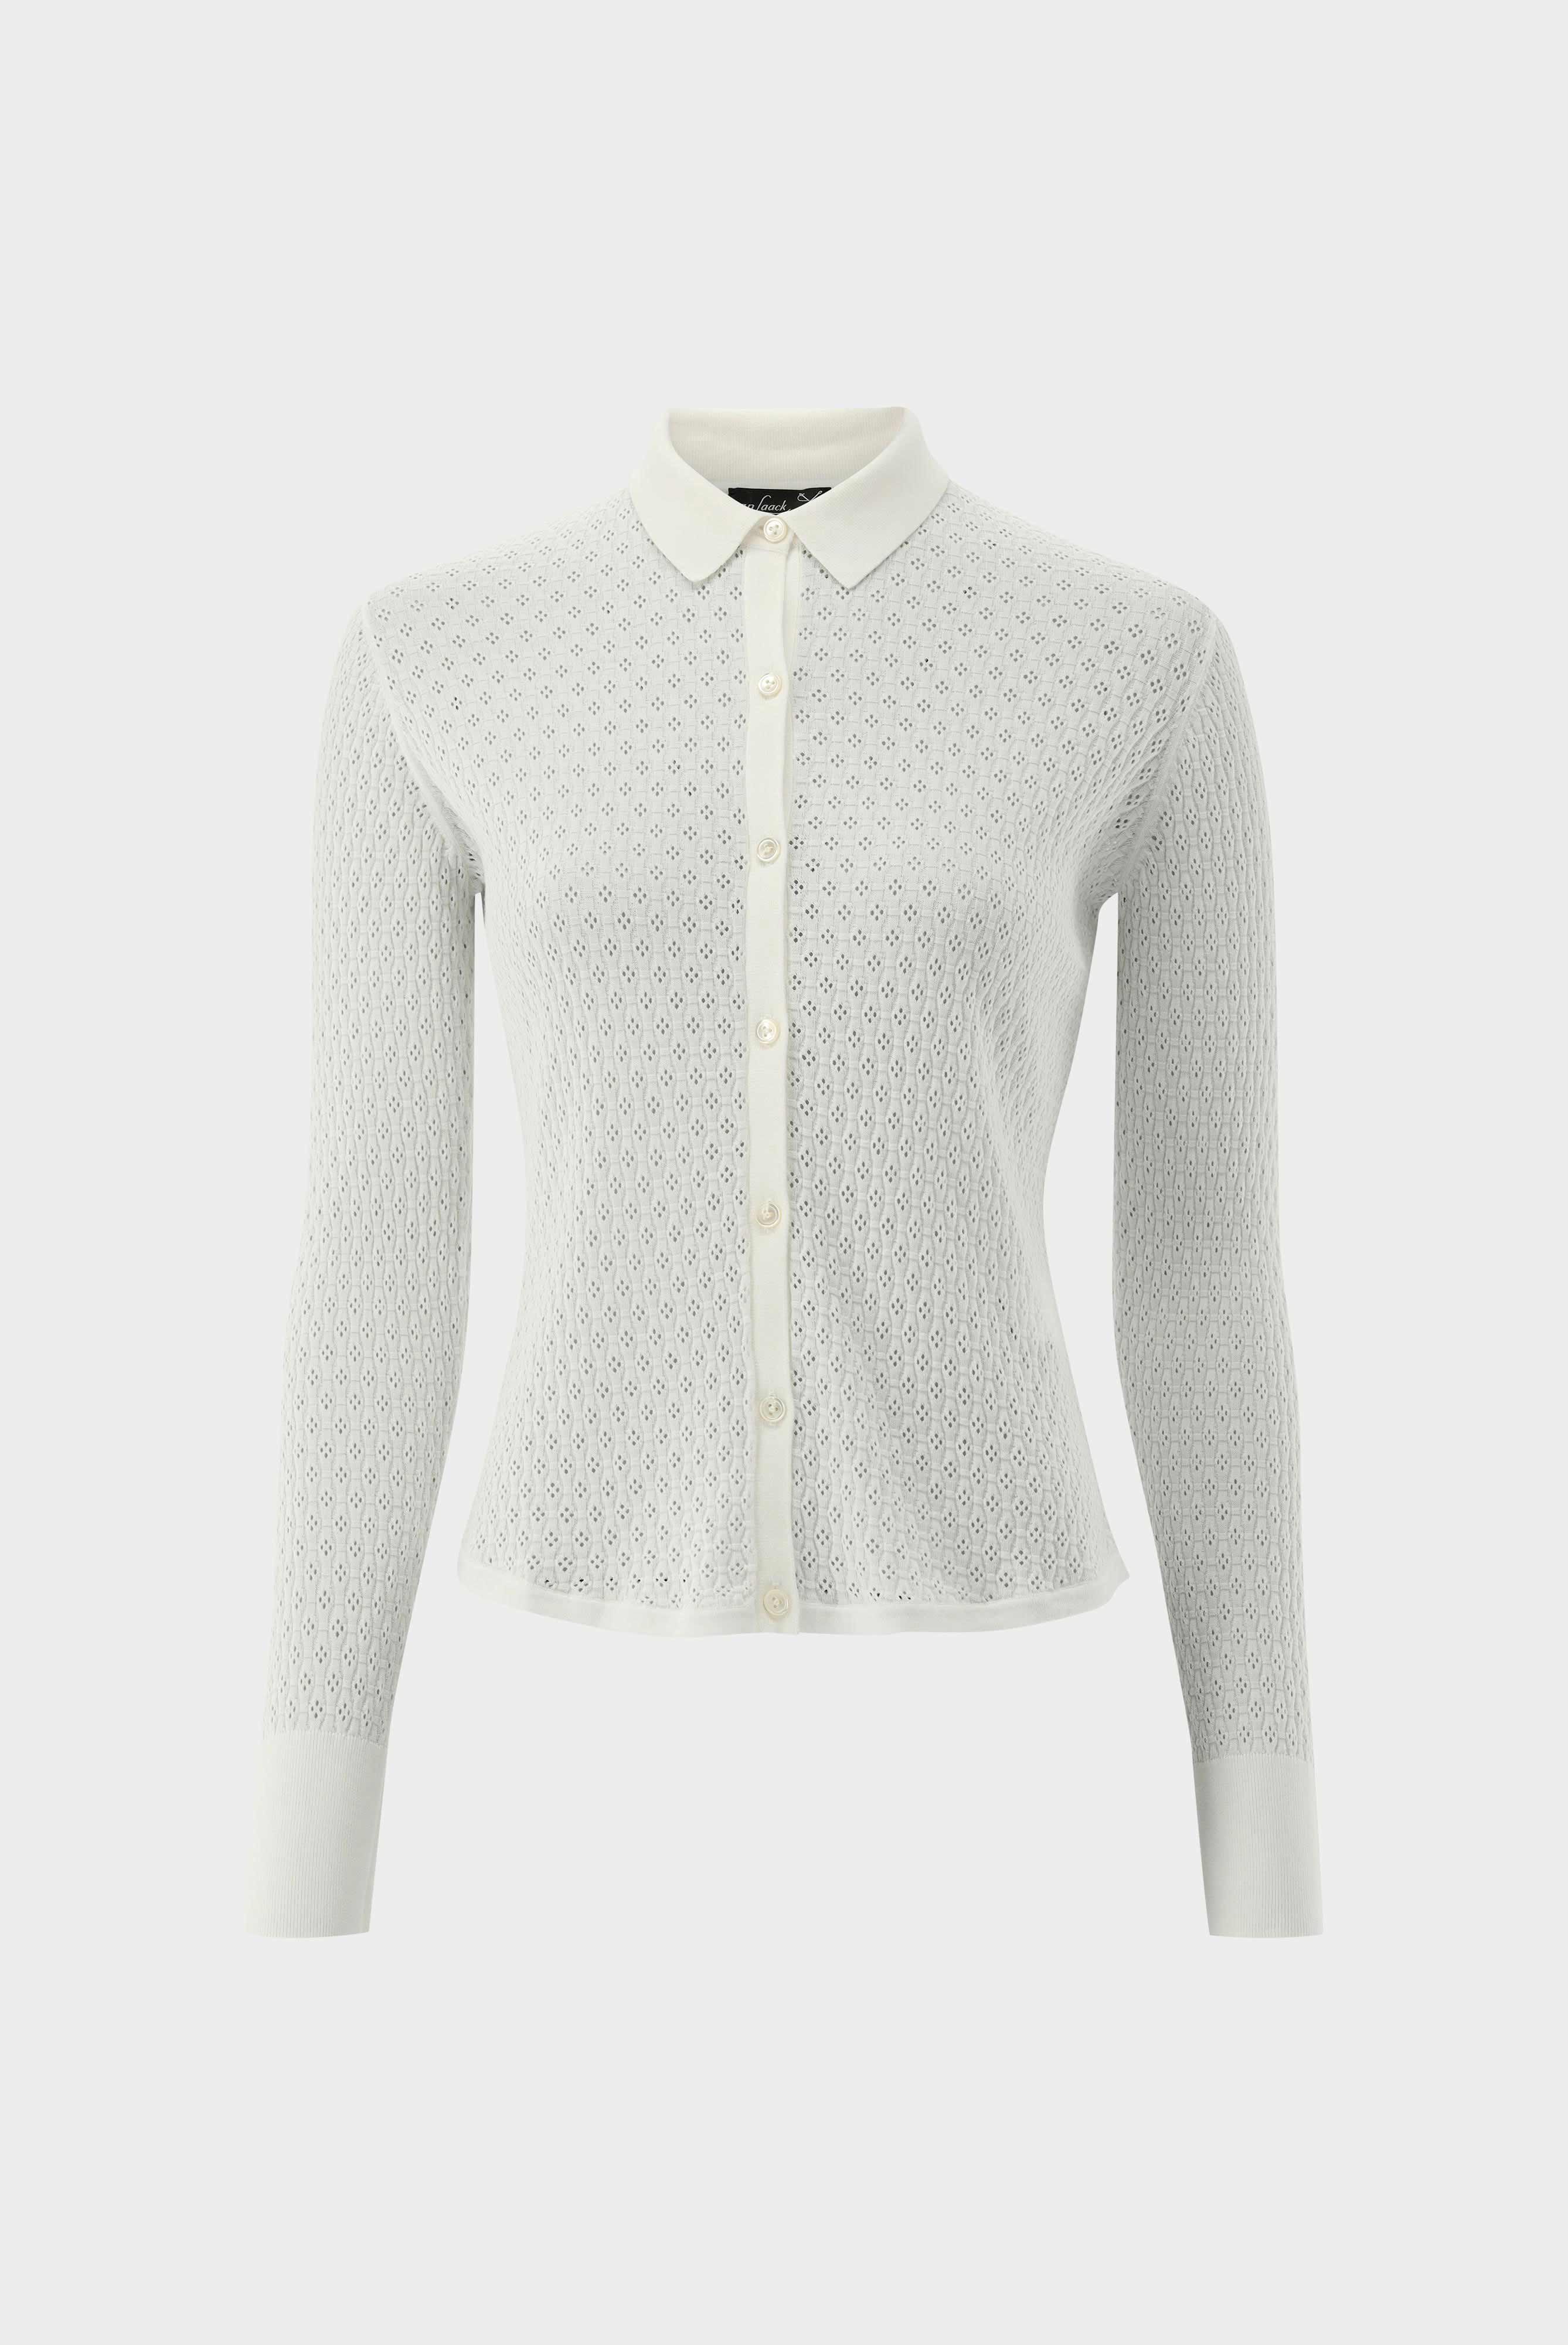 Casual Blouses+Knit Shirt with Lace Pattern in Air Cotton+09.9990..S00253.100.XL